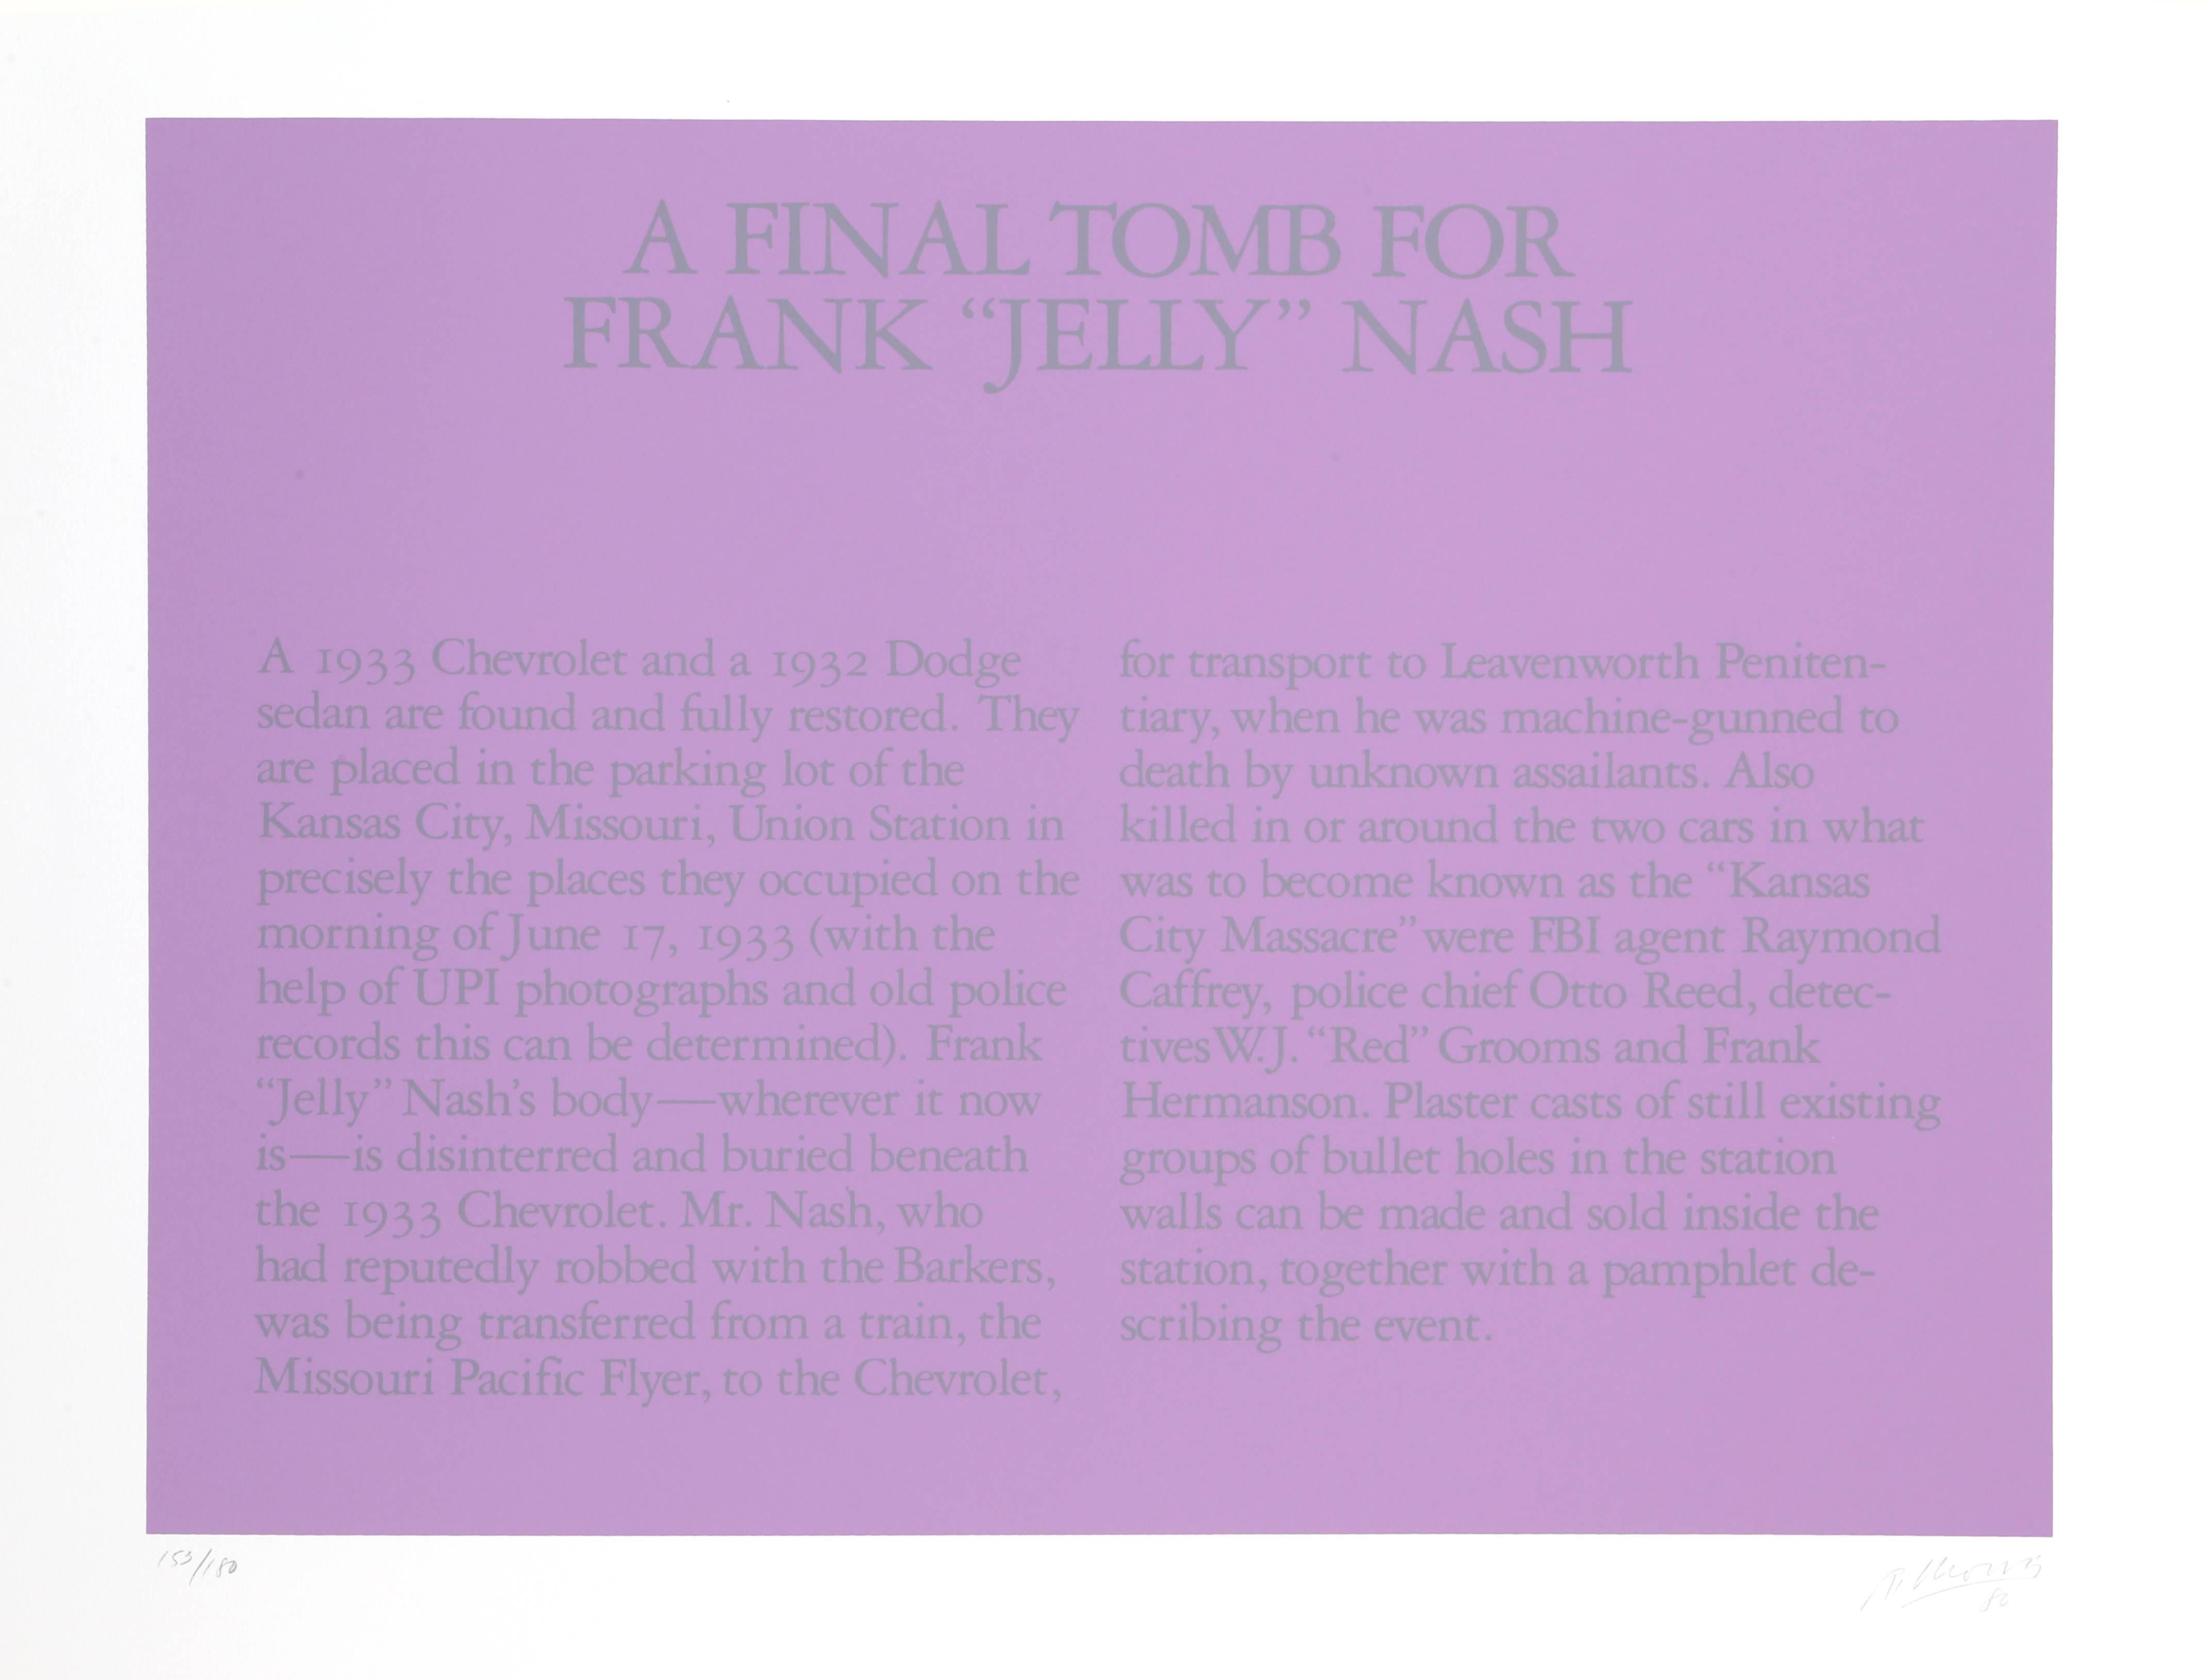 A Final Tomb for Frank "Jelly" Nash, Abstract Screenprint by Robert Morris